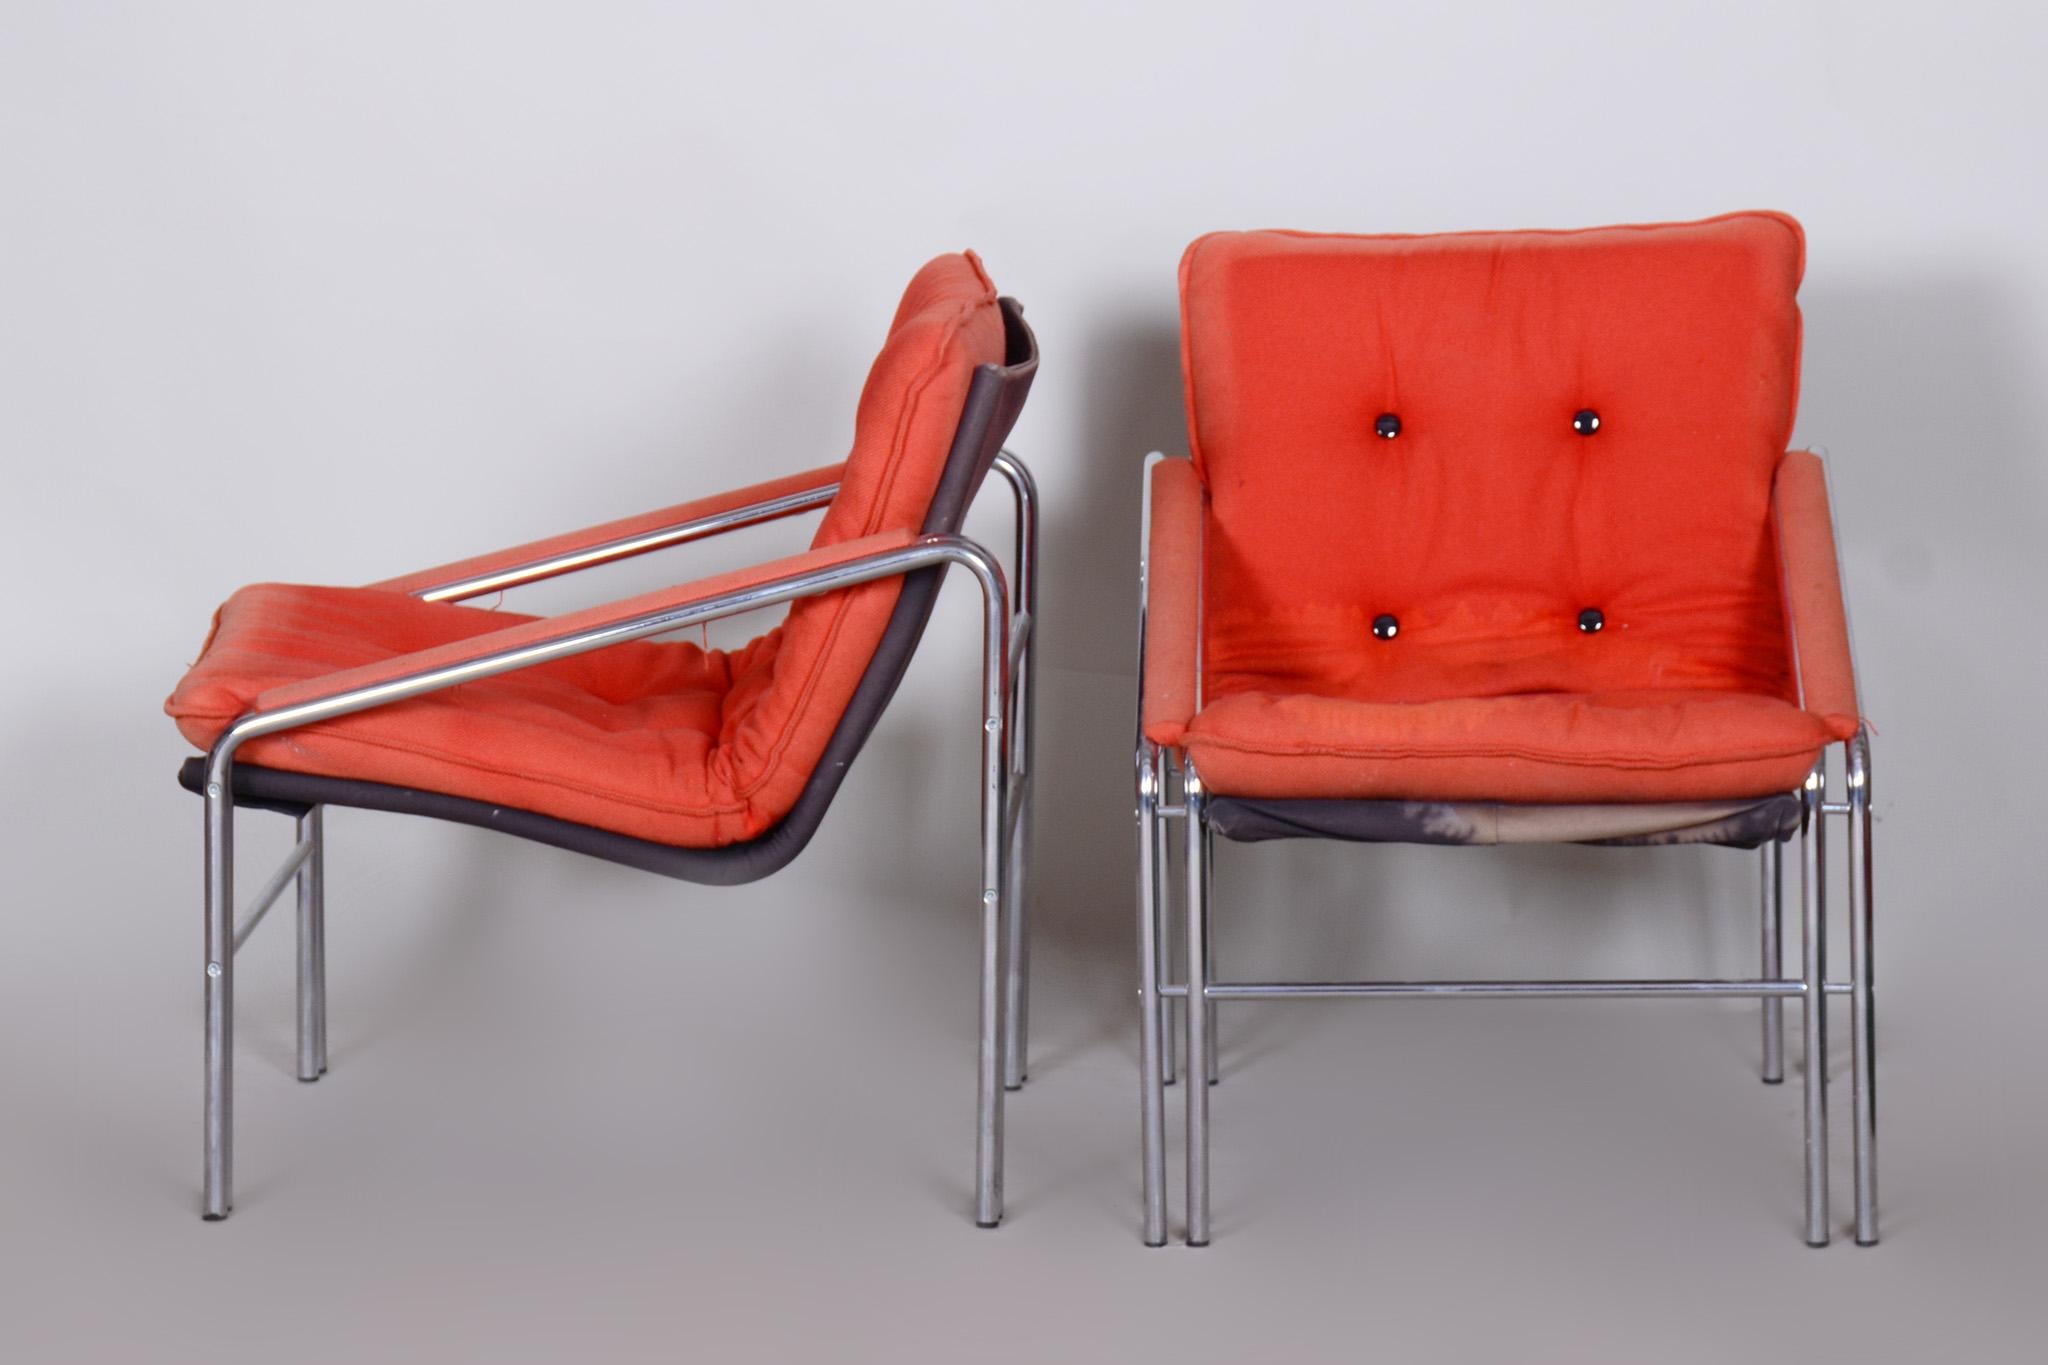 Original pair of midcentury armchairs

Source: Czechia 
Period: 1960-1969
Material: Chrome-plated Steel, Fabric

Very well preserved.
The chrome is in excellent condition.
Upholstery has been professionally cleaned.